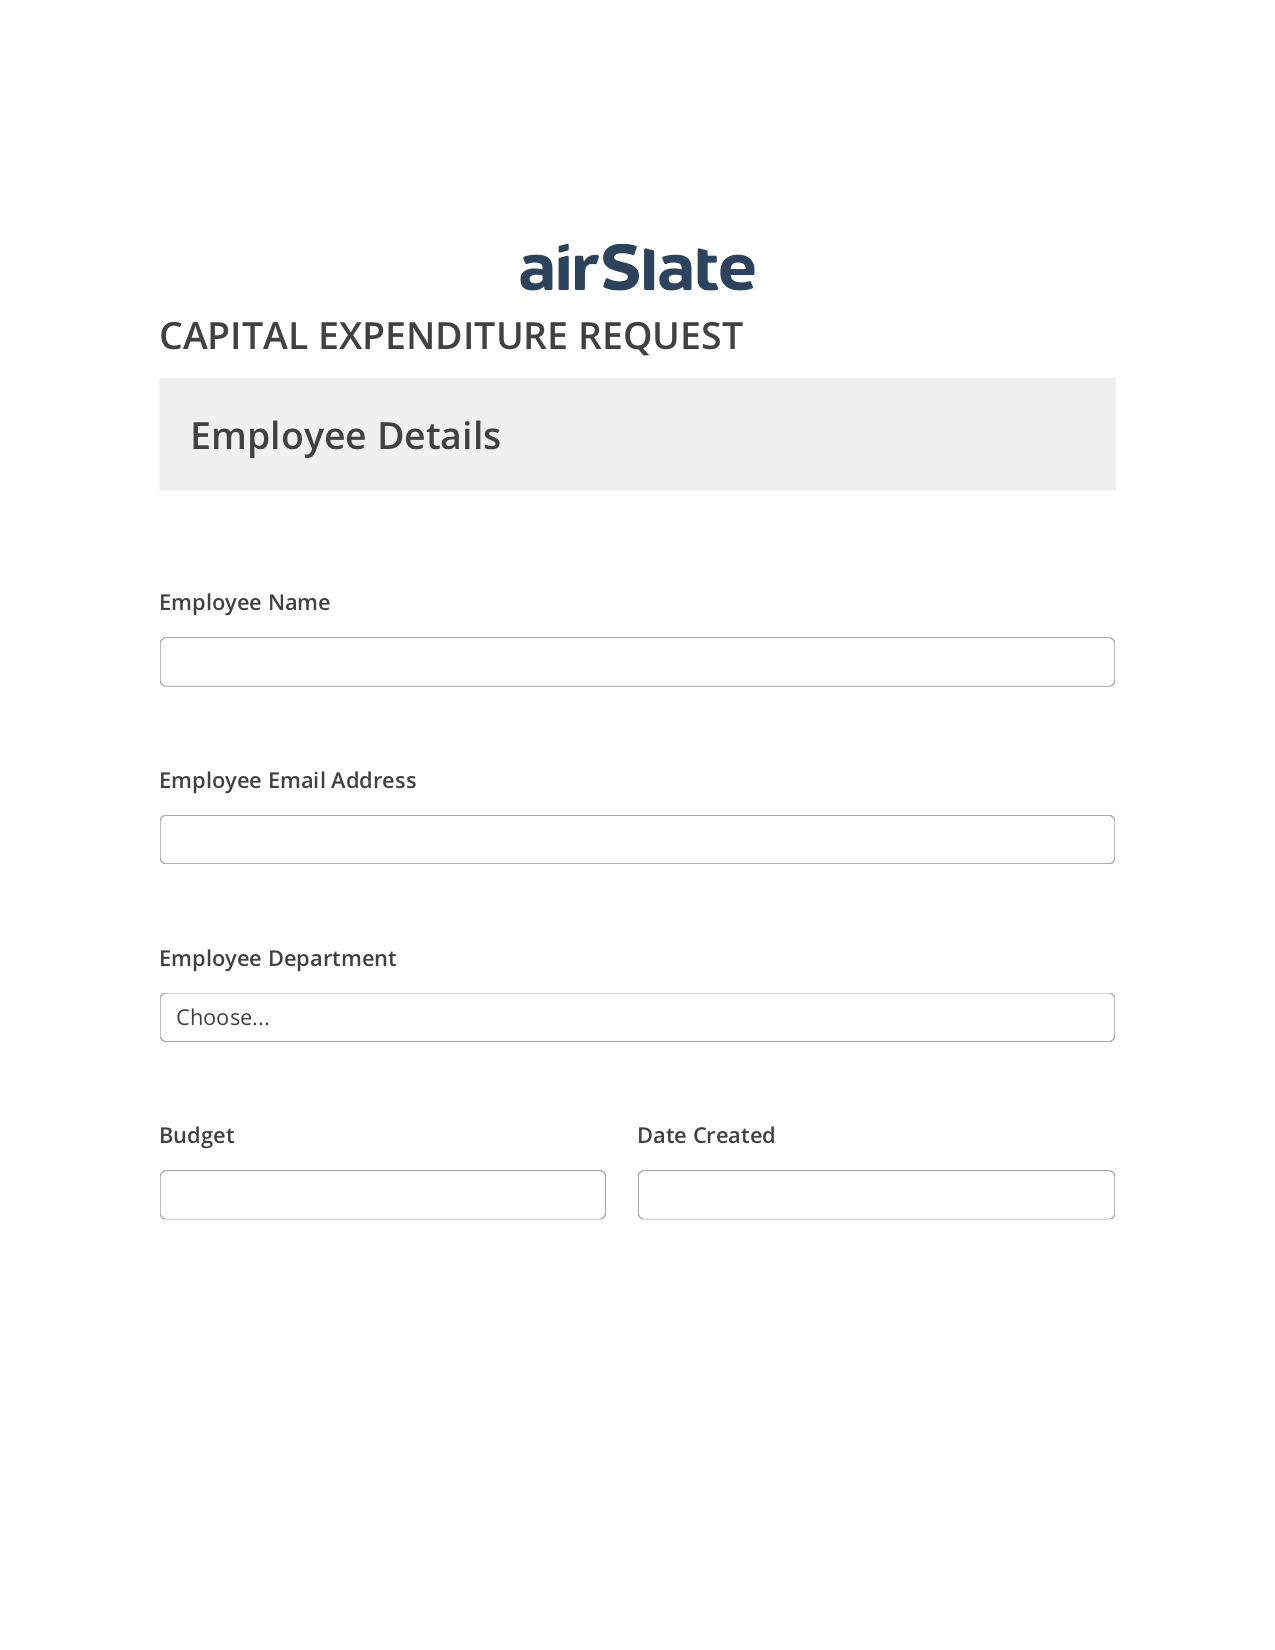 Capital Expenditure Request Approval Workflow Pre-fill from MySQL Dropdown Options Bot, System Bot - Create a Slate in another Flow, Export to Google Sheet Bot